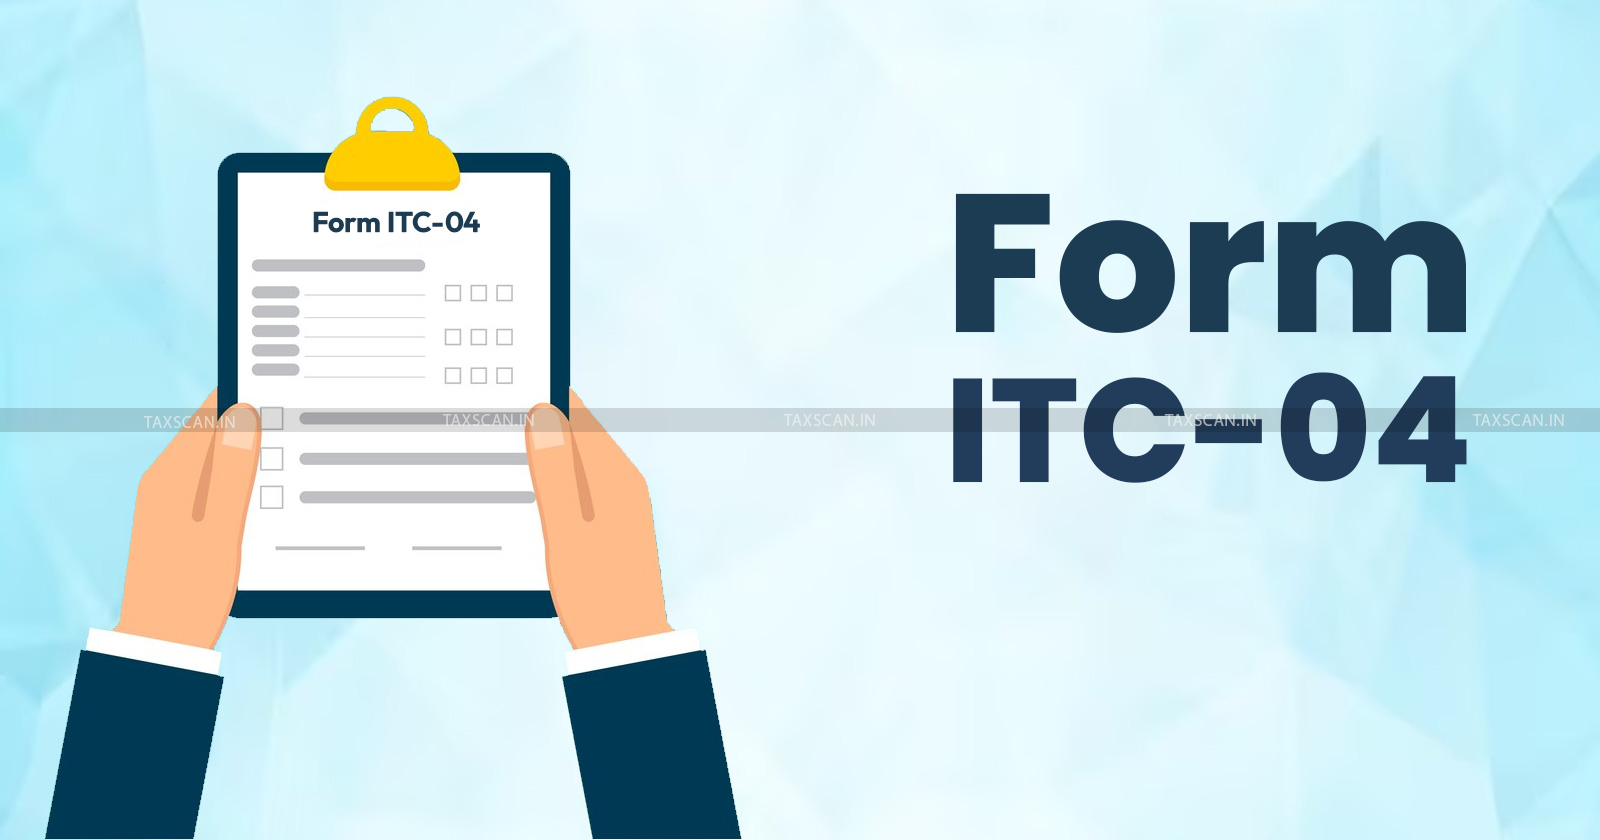 GST - GST Payers - FORM ITC 04 - AATO - TAXSCAN